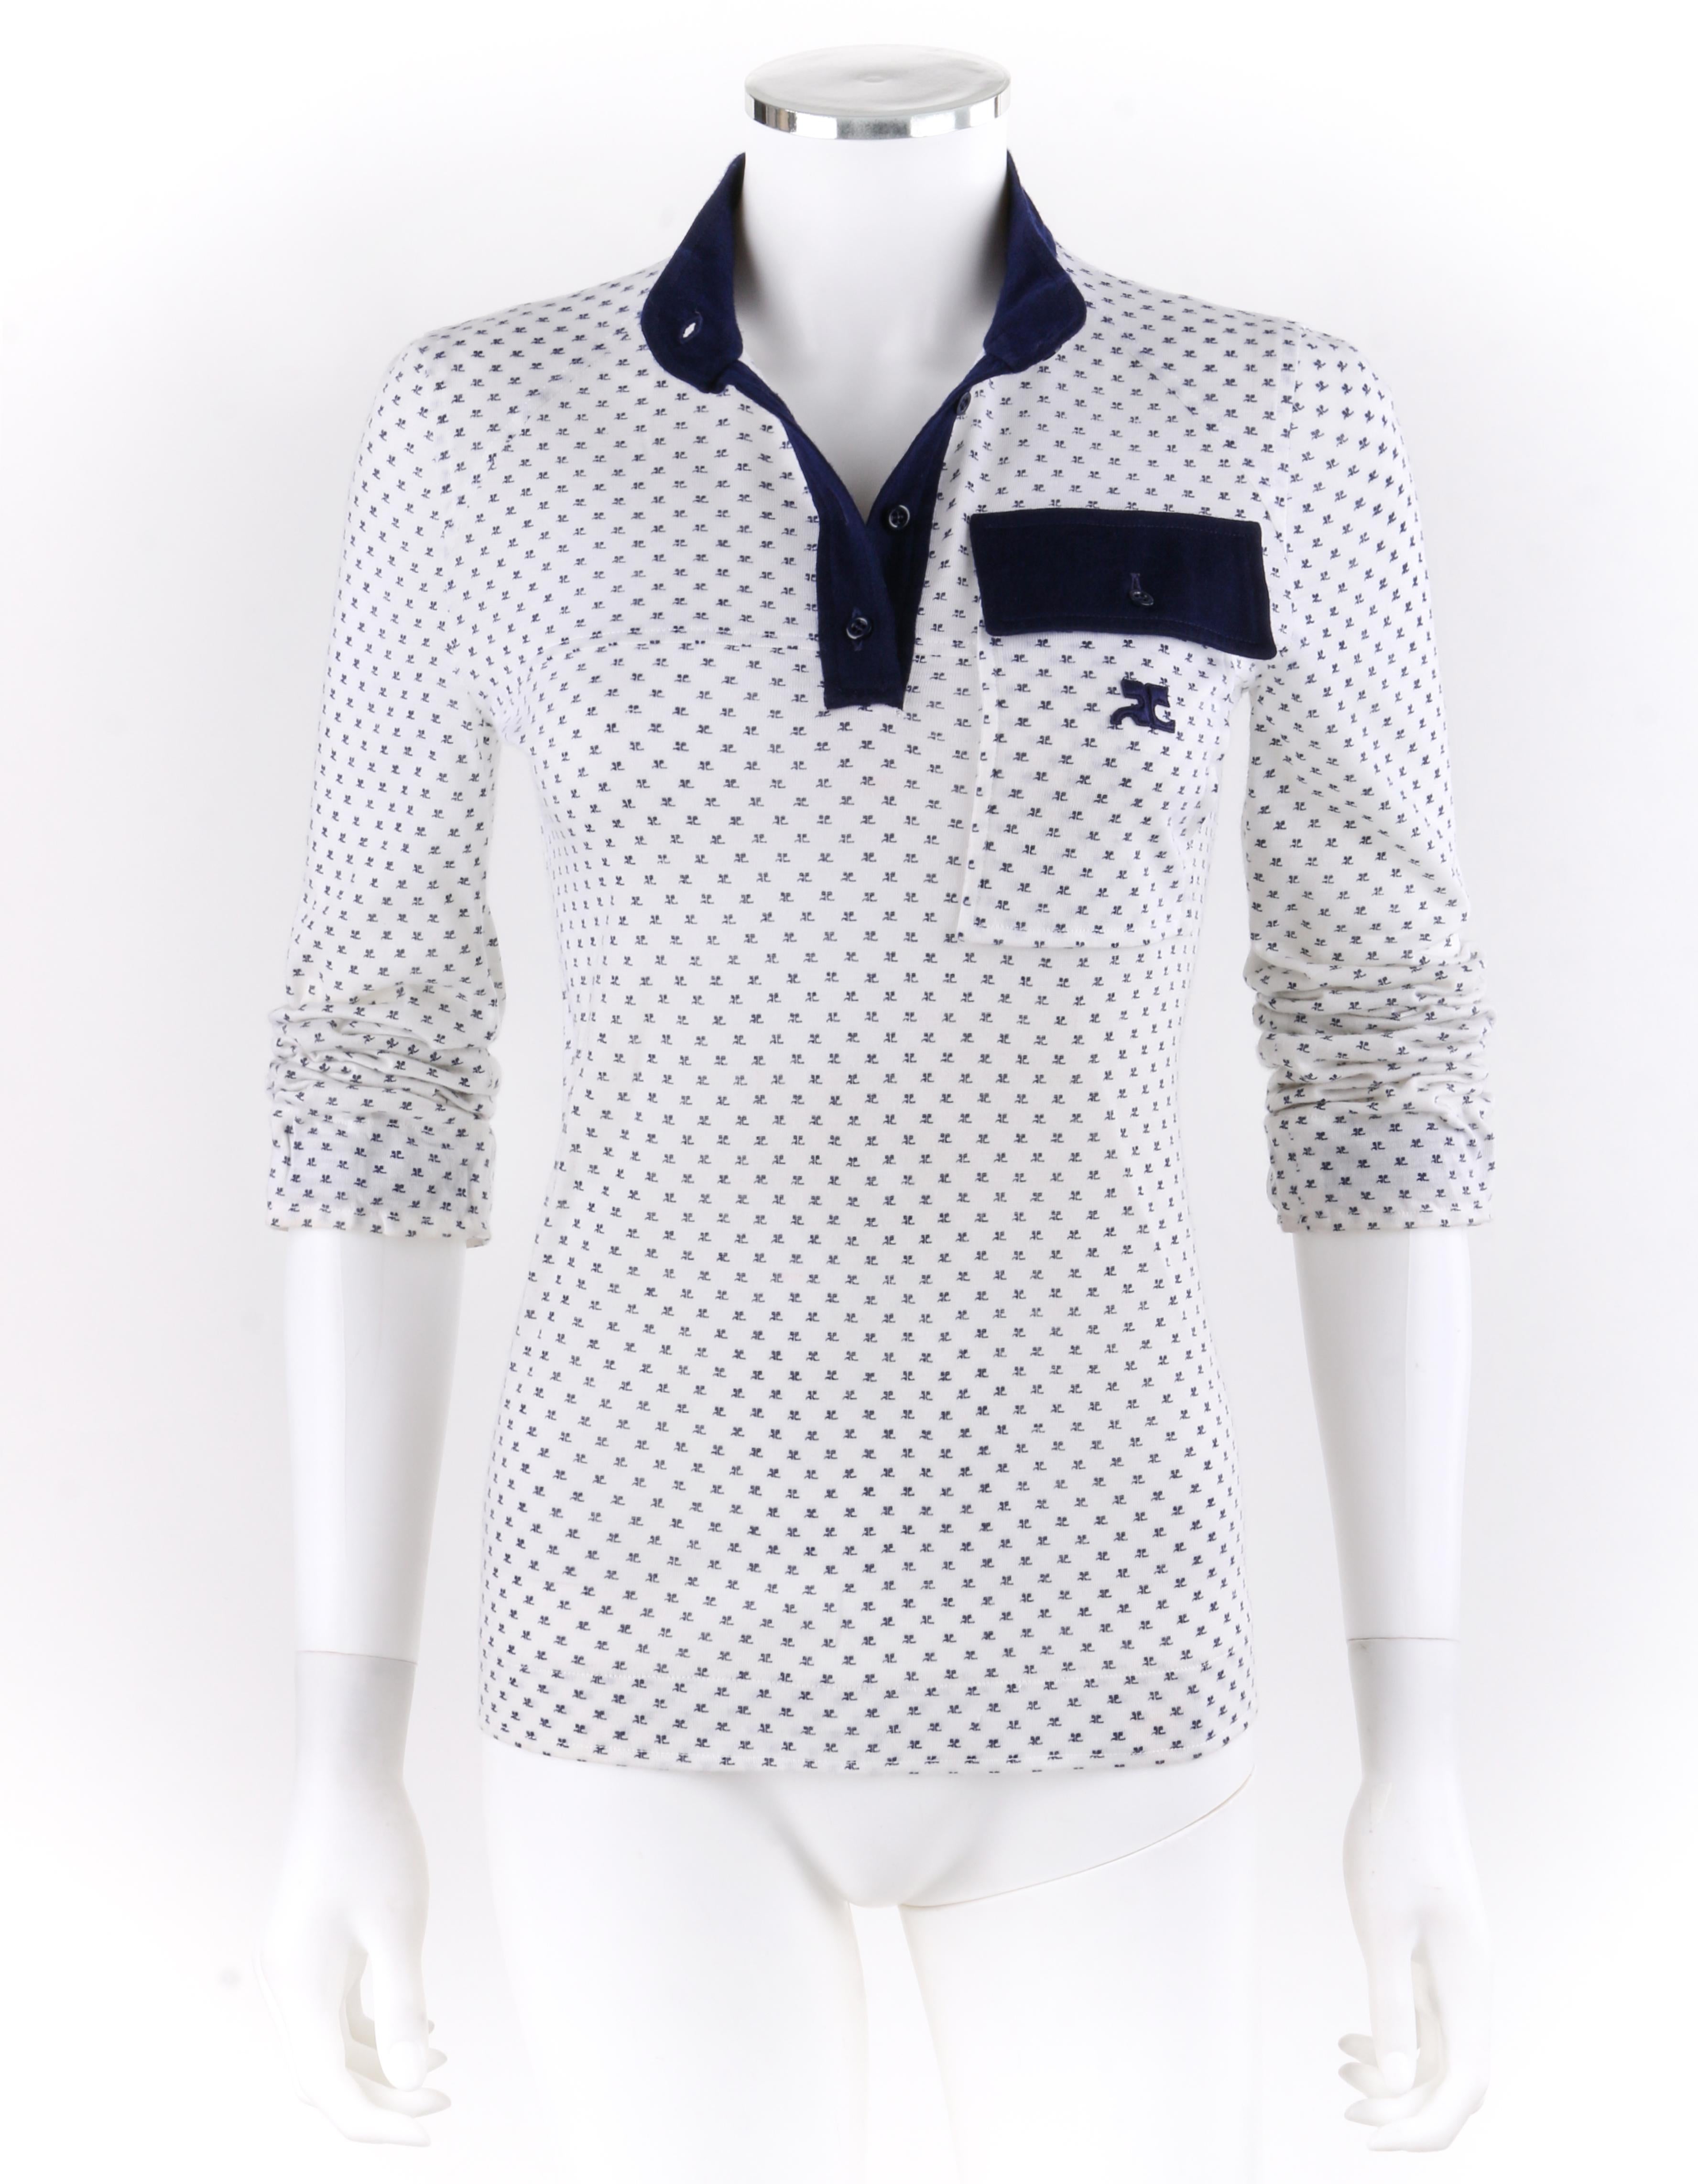 ANDRE COURREGES c.1970’s Blue & White Signature Logo Print Pullover Shirt Top
 
Circa: c.1970’s
Label(s): Courreges Paris
Style: Pullover shirt
Color(s): Blue and white
Lined: No
Marked Fabric Content: Acrylic/nylon
Additional Details / Inclusions: